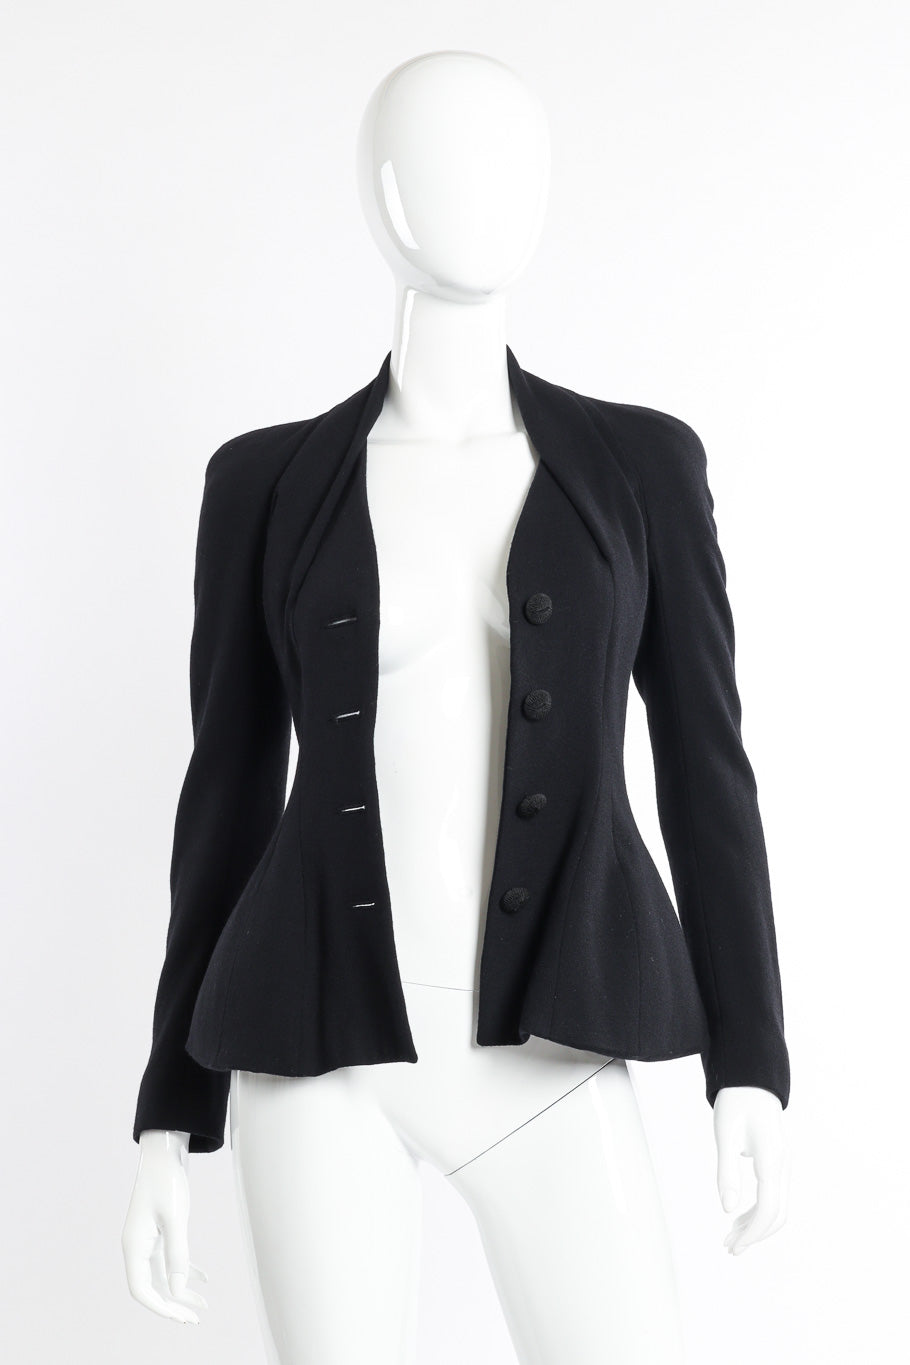 1995 F/W Dolores Tailored Jacket by John Galliano on mannequin unbuttoned @recessla